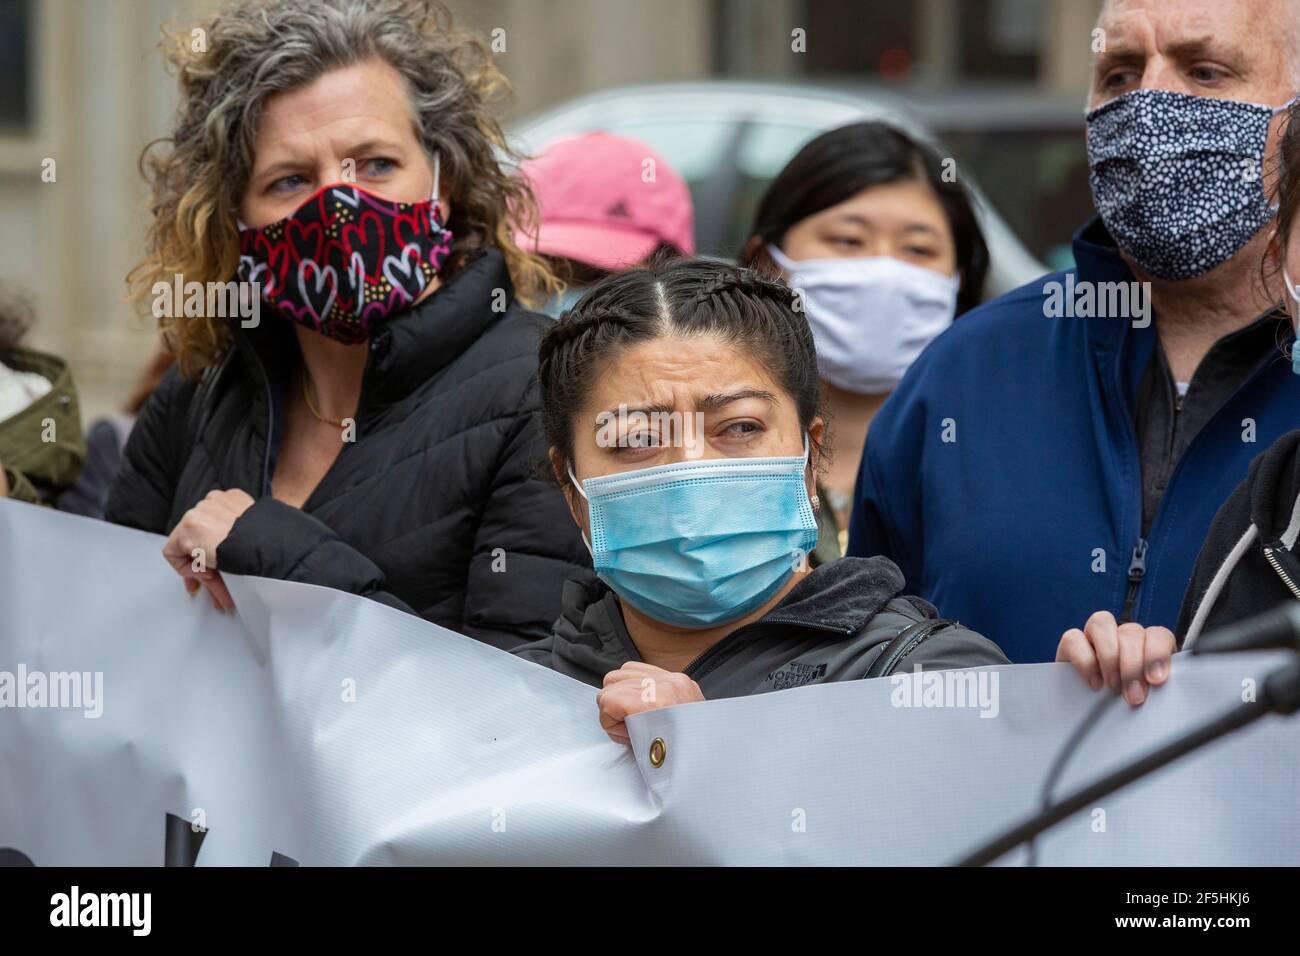 March 26, 2021. Boston, MA. Recently fired Nine Zero Hotel workers gathered at the hotel to demand their jobs back after Nine Zero Hotel fired 52 empl Stock Photo